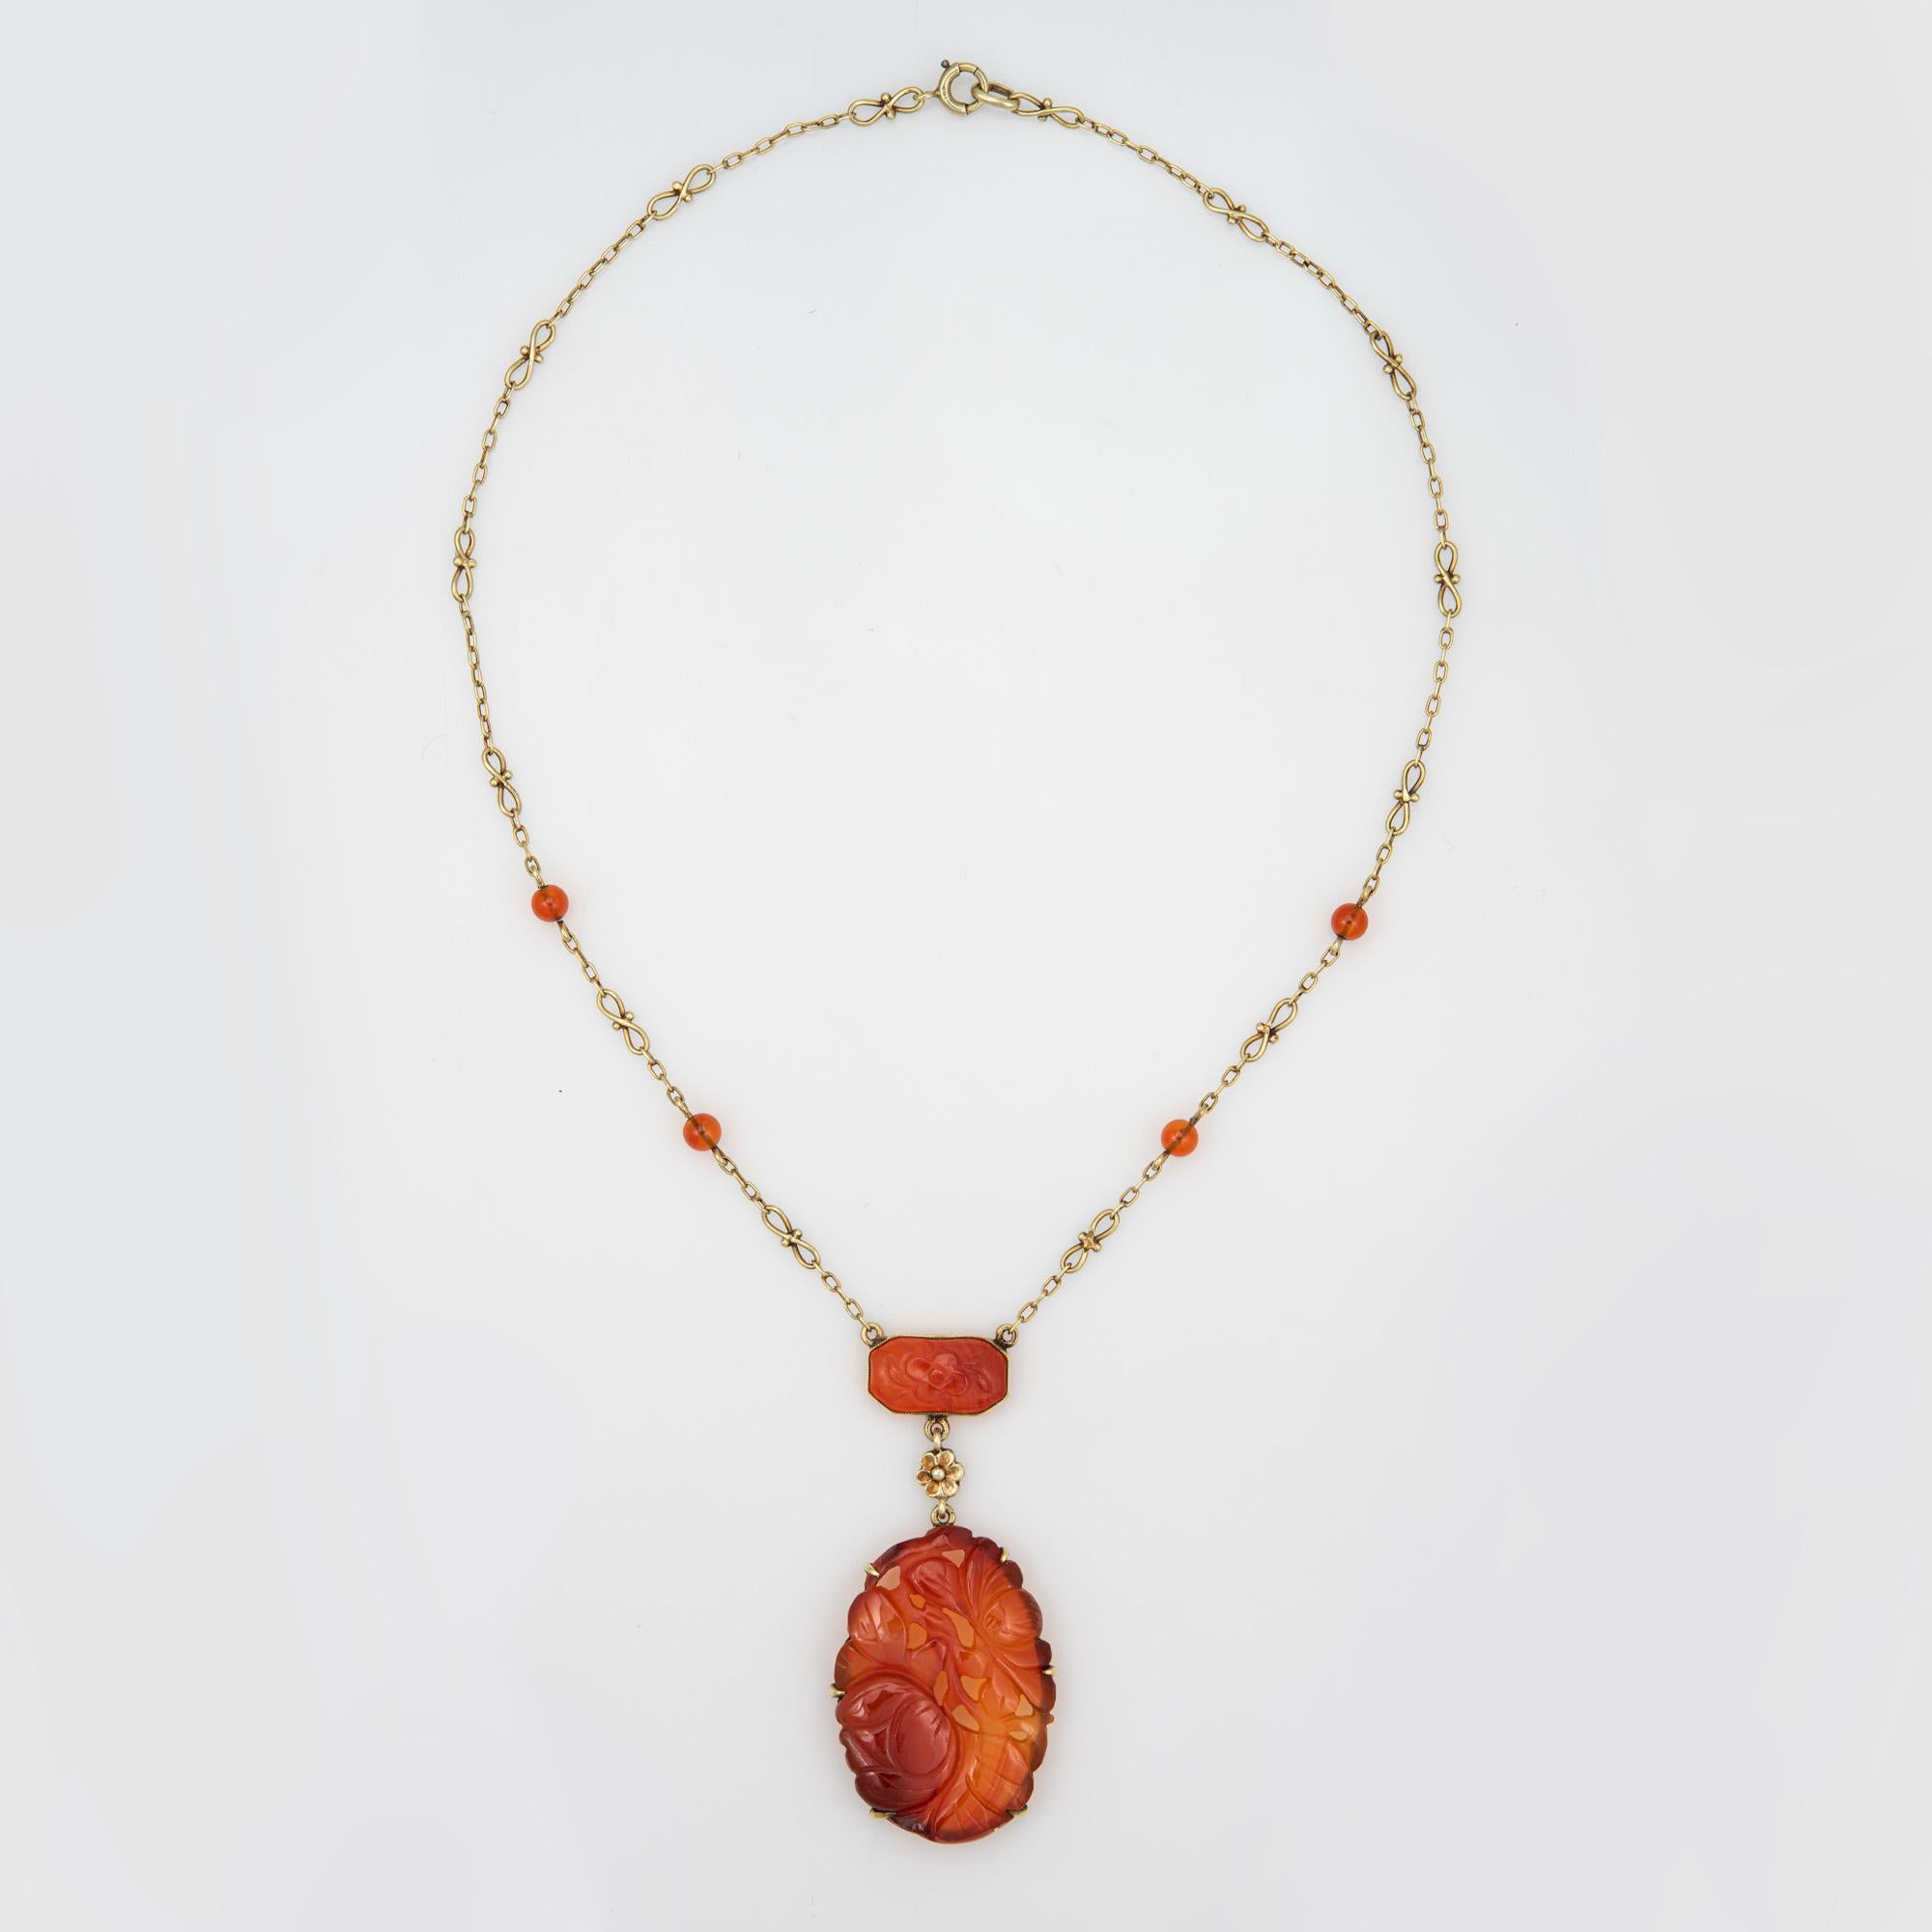 Finely detailed vintage Art Deco era carved carnelian necklace (circa 1920s to 1930s), crafted in 14 karat yellow gold.  

The larger carnelian drop measures 1 1/2 x 1 inch, with the smaller rectangular piece measuring 15mm x 9mm. Small 4.5mm beads